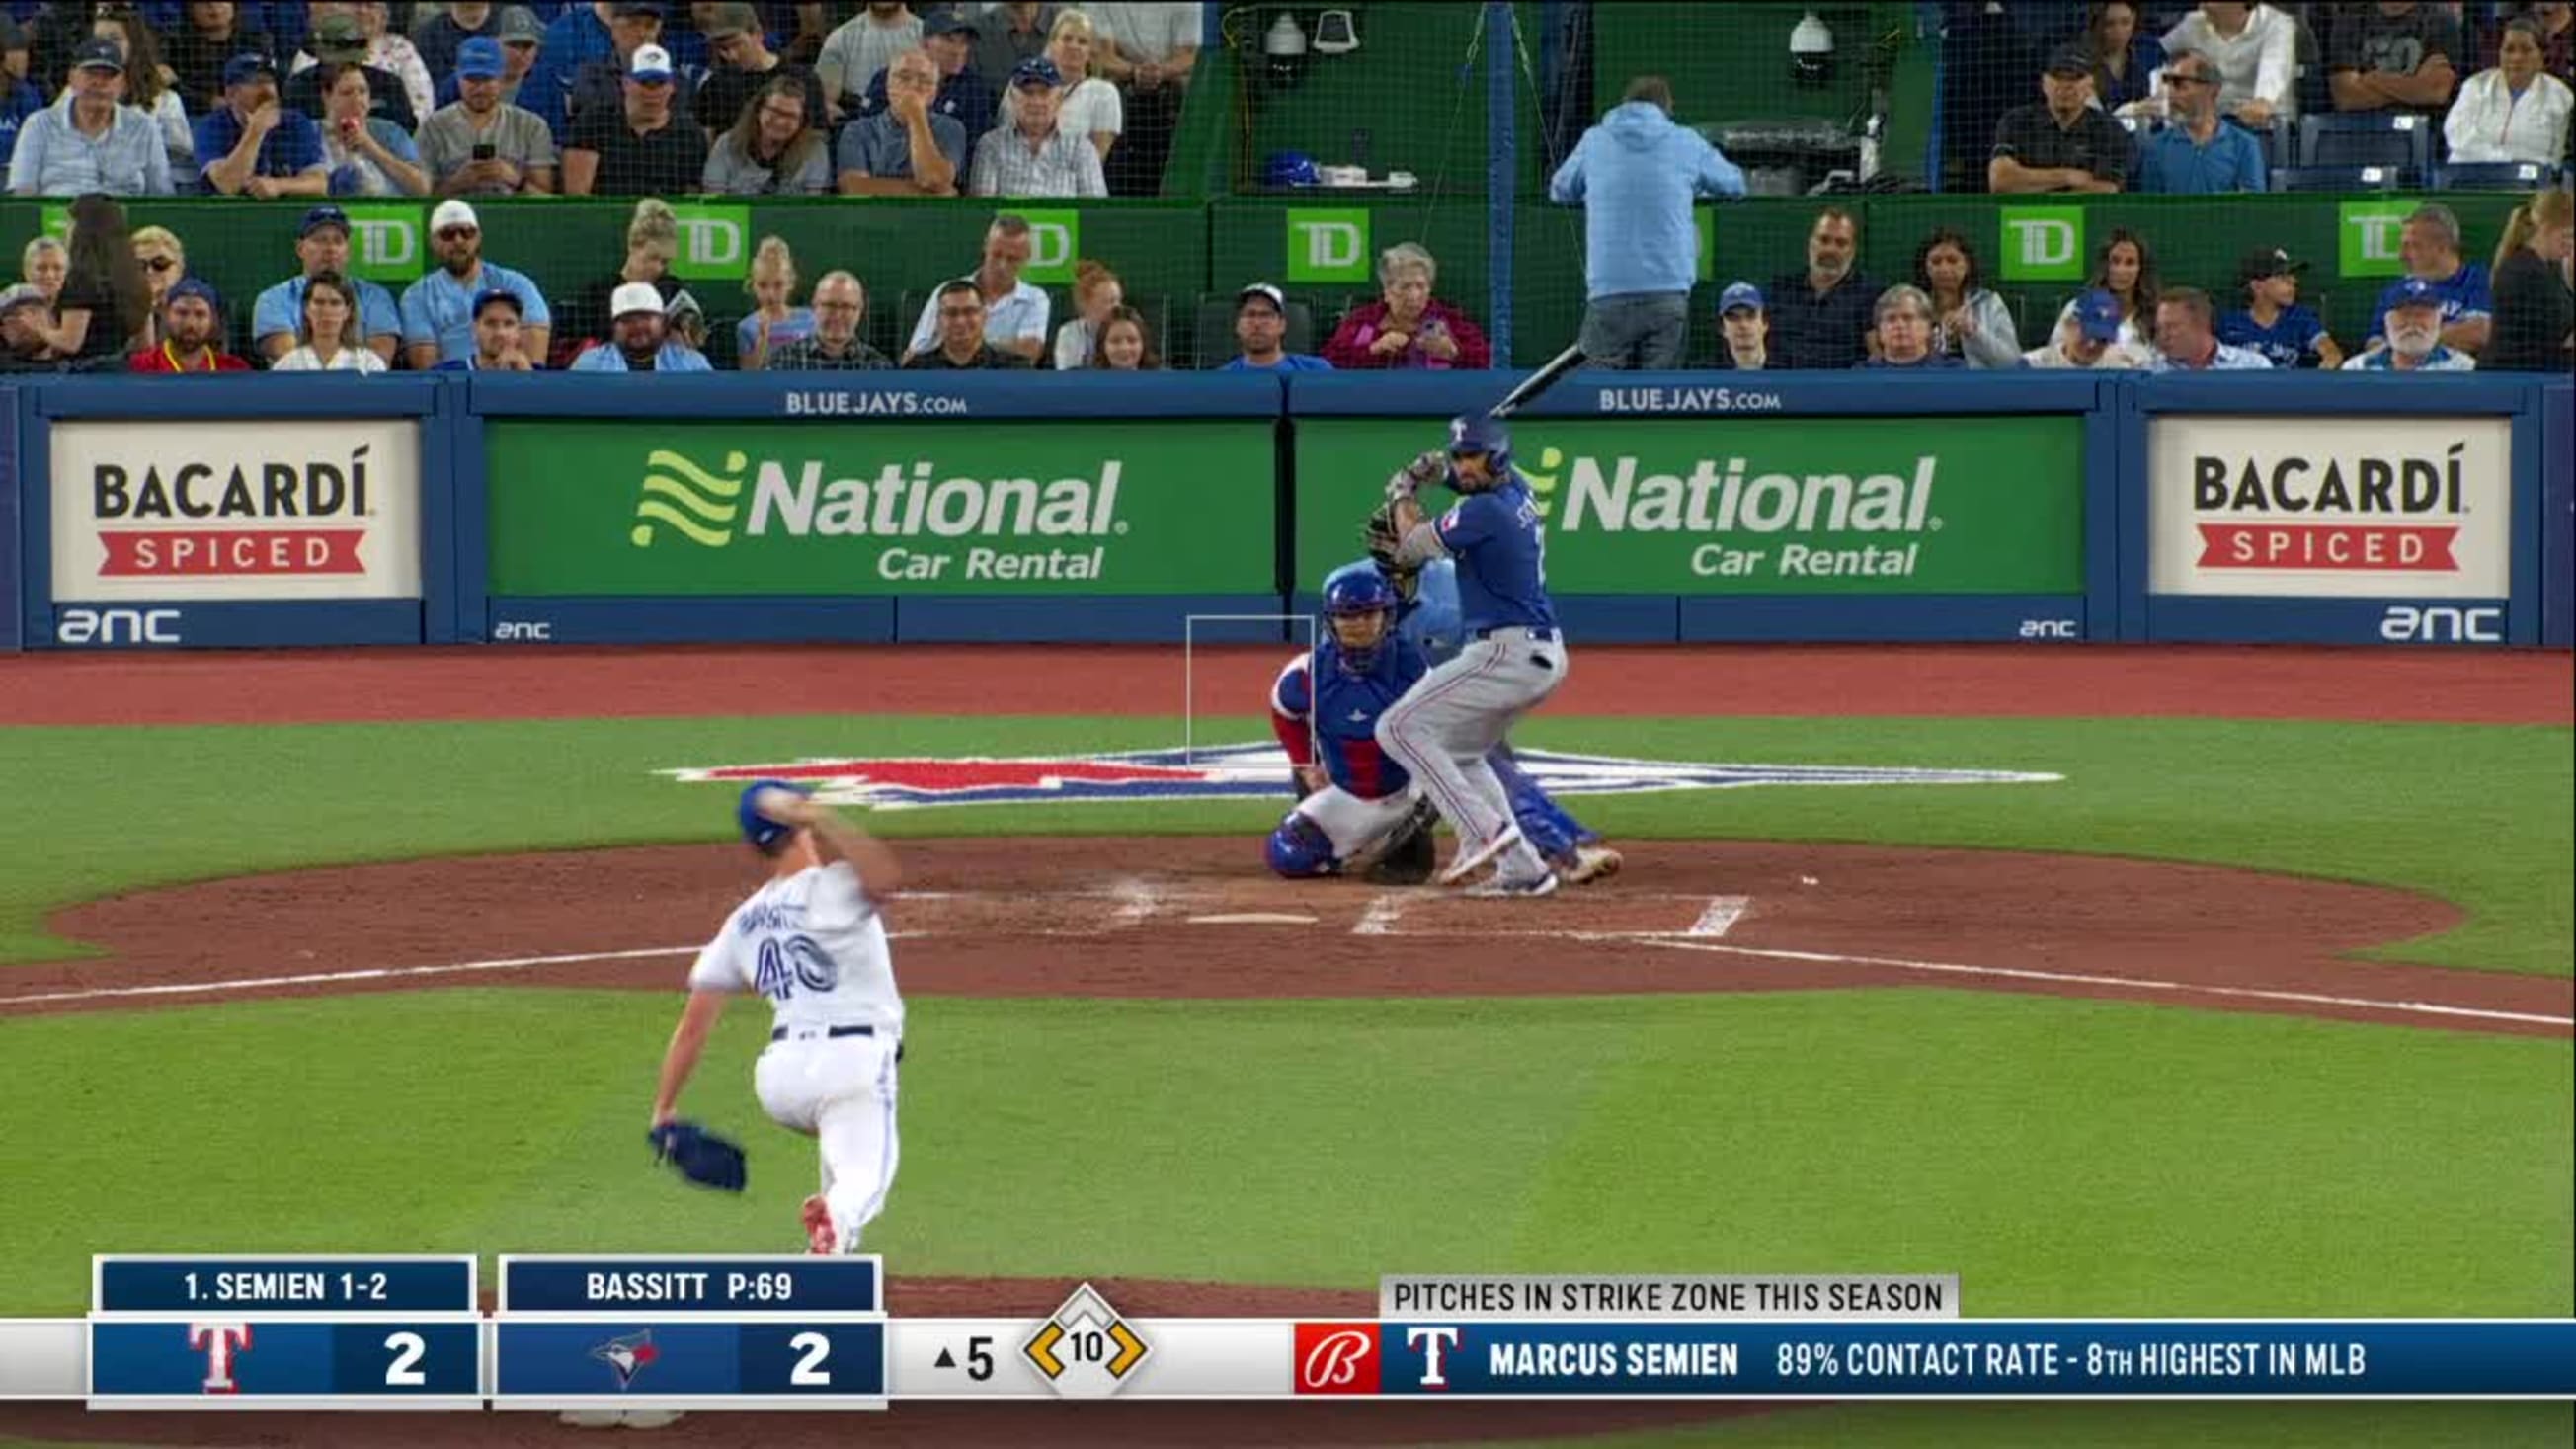 Unassisted double play for Cavan Biggio to end the inning! 👏 🎥: @bluejays